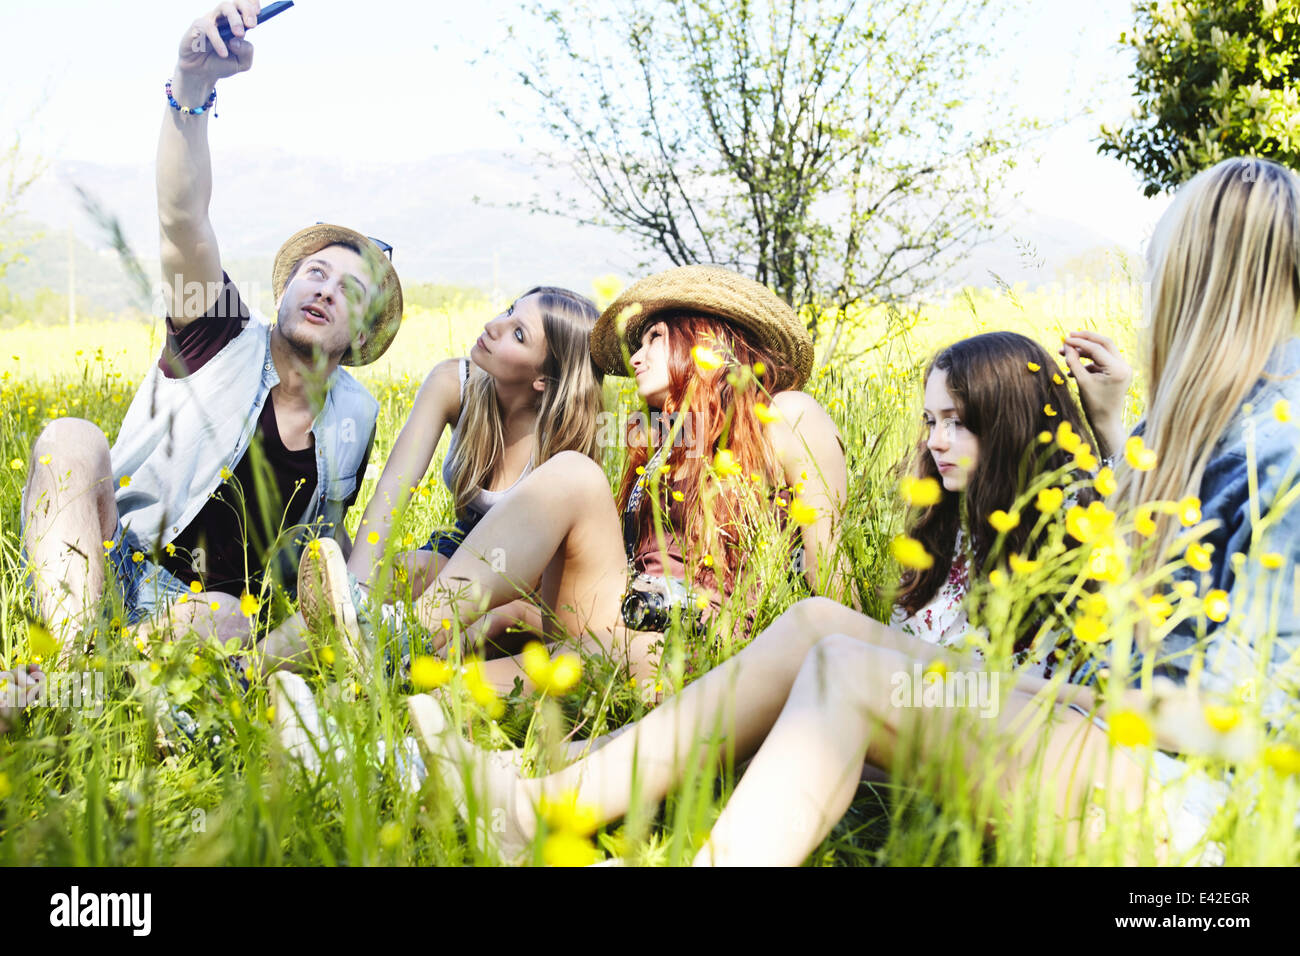 Group of friends sitting in grass photographing themselves Stock Photo